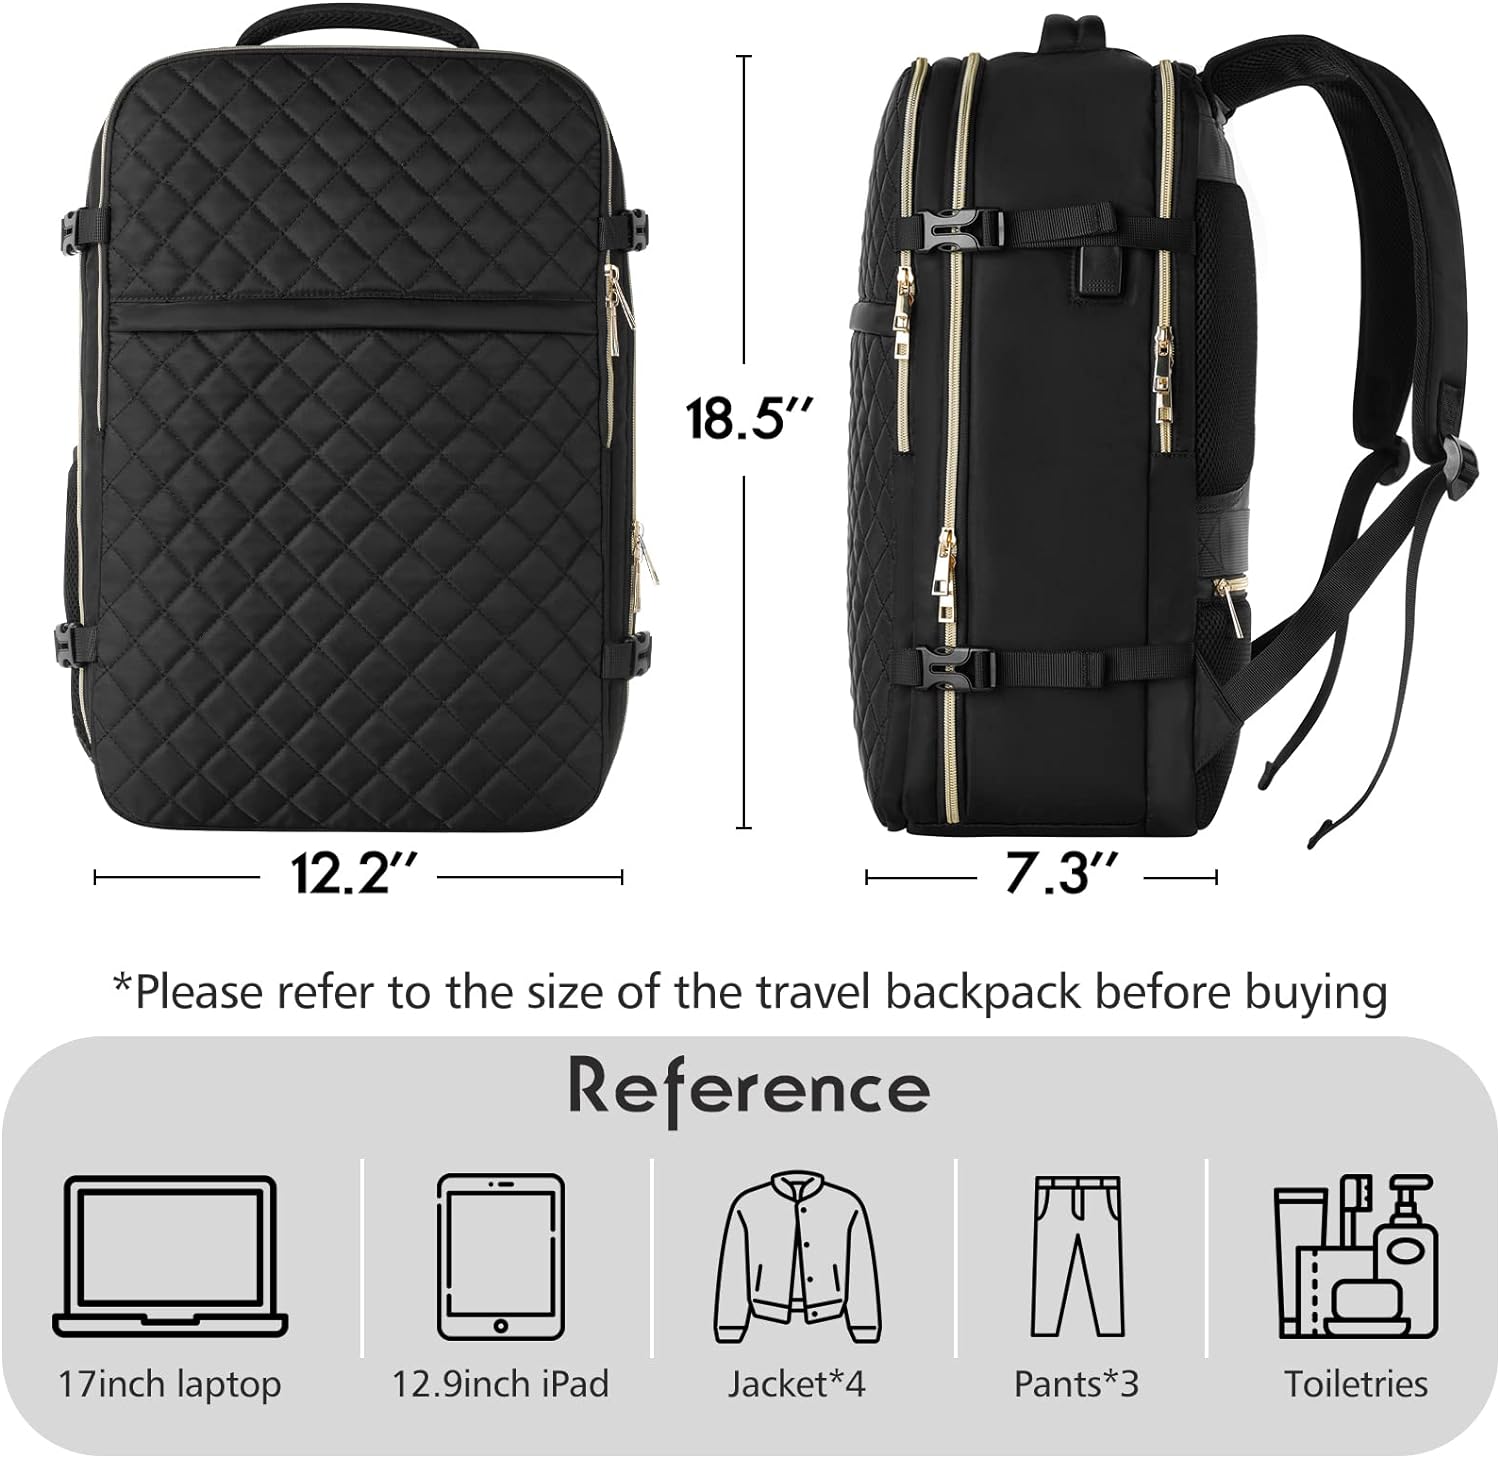 Big Size Travel Backpack Women, Flight Approved Carry on Backpack, Water Resistant Anti-Theft Casual Daypack School Bag Fit 17 Inch Laptop with USB Charging Port, Black